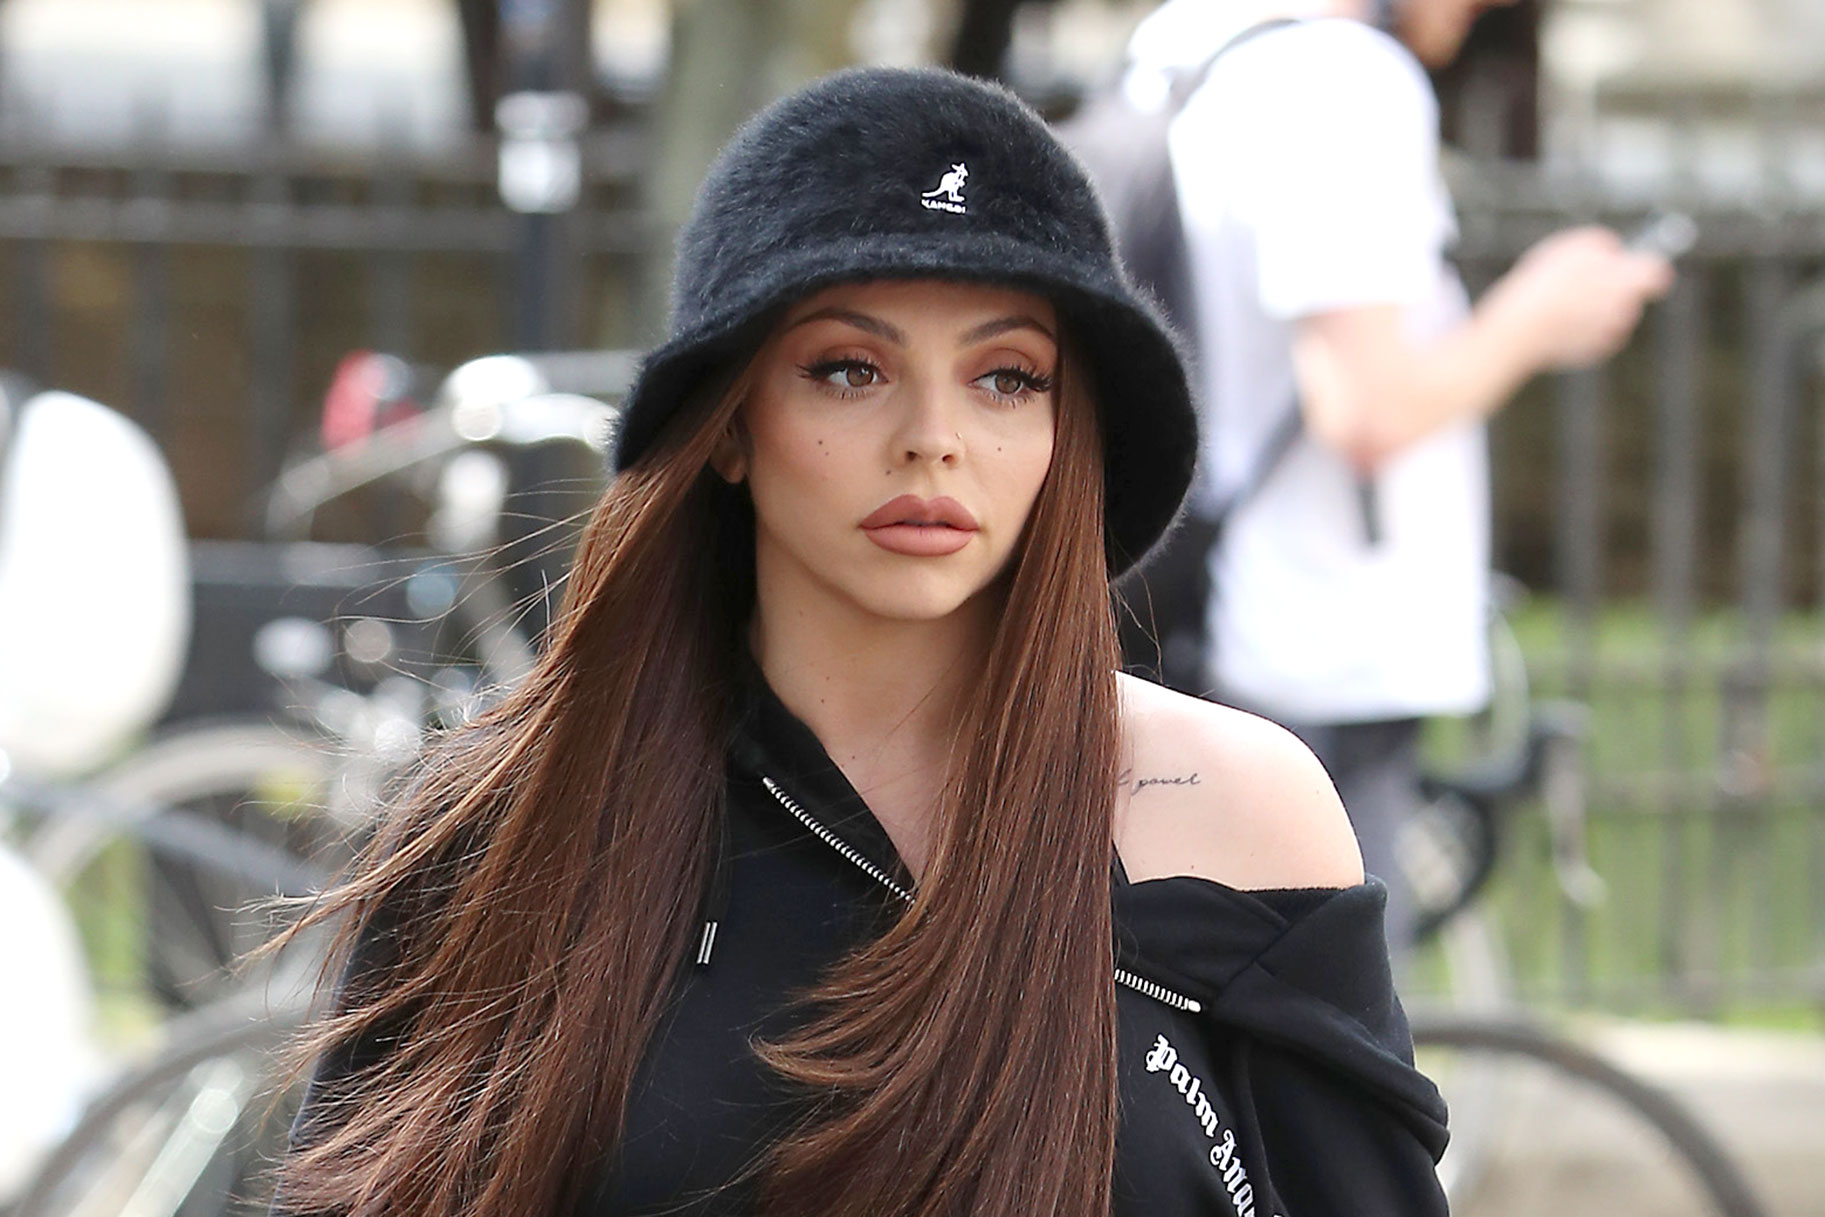 Jesy Nelson Accused of Blackfishing in New Exposé